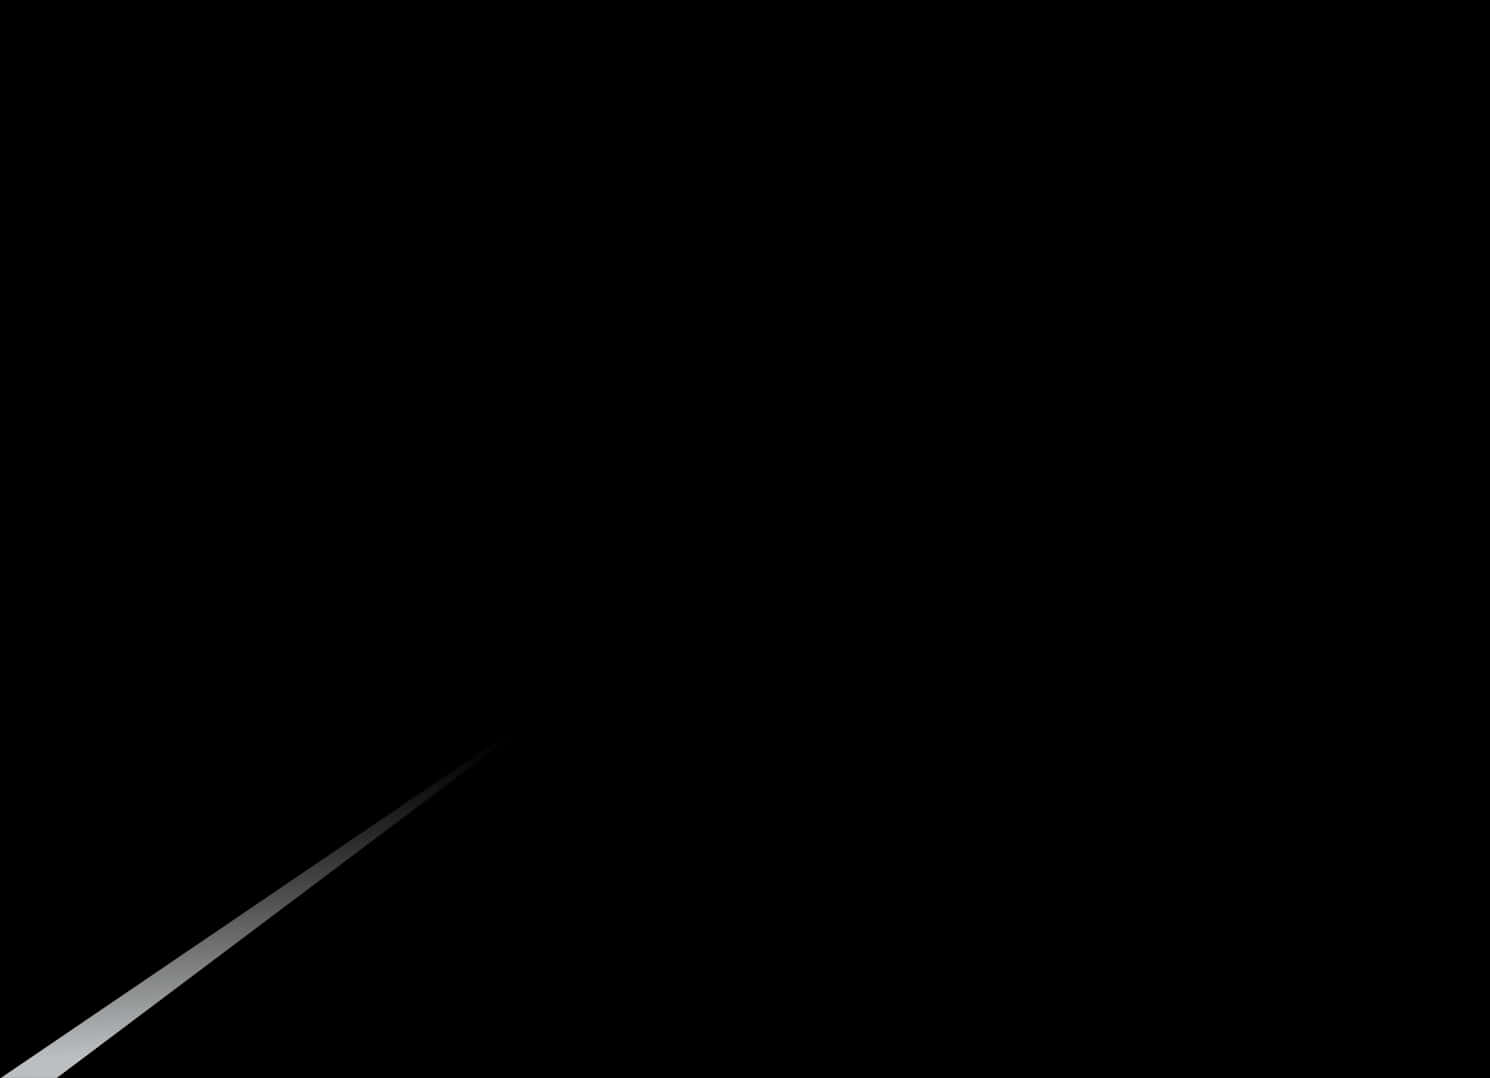 A Black Background With A White Line